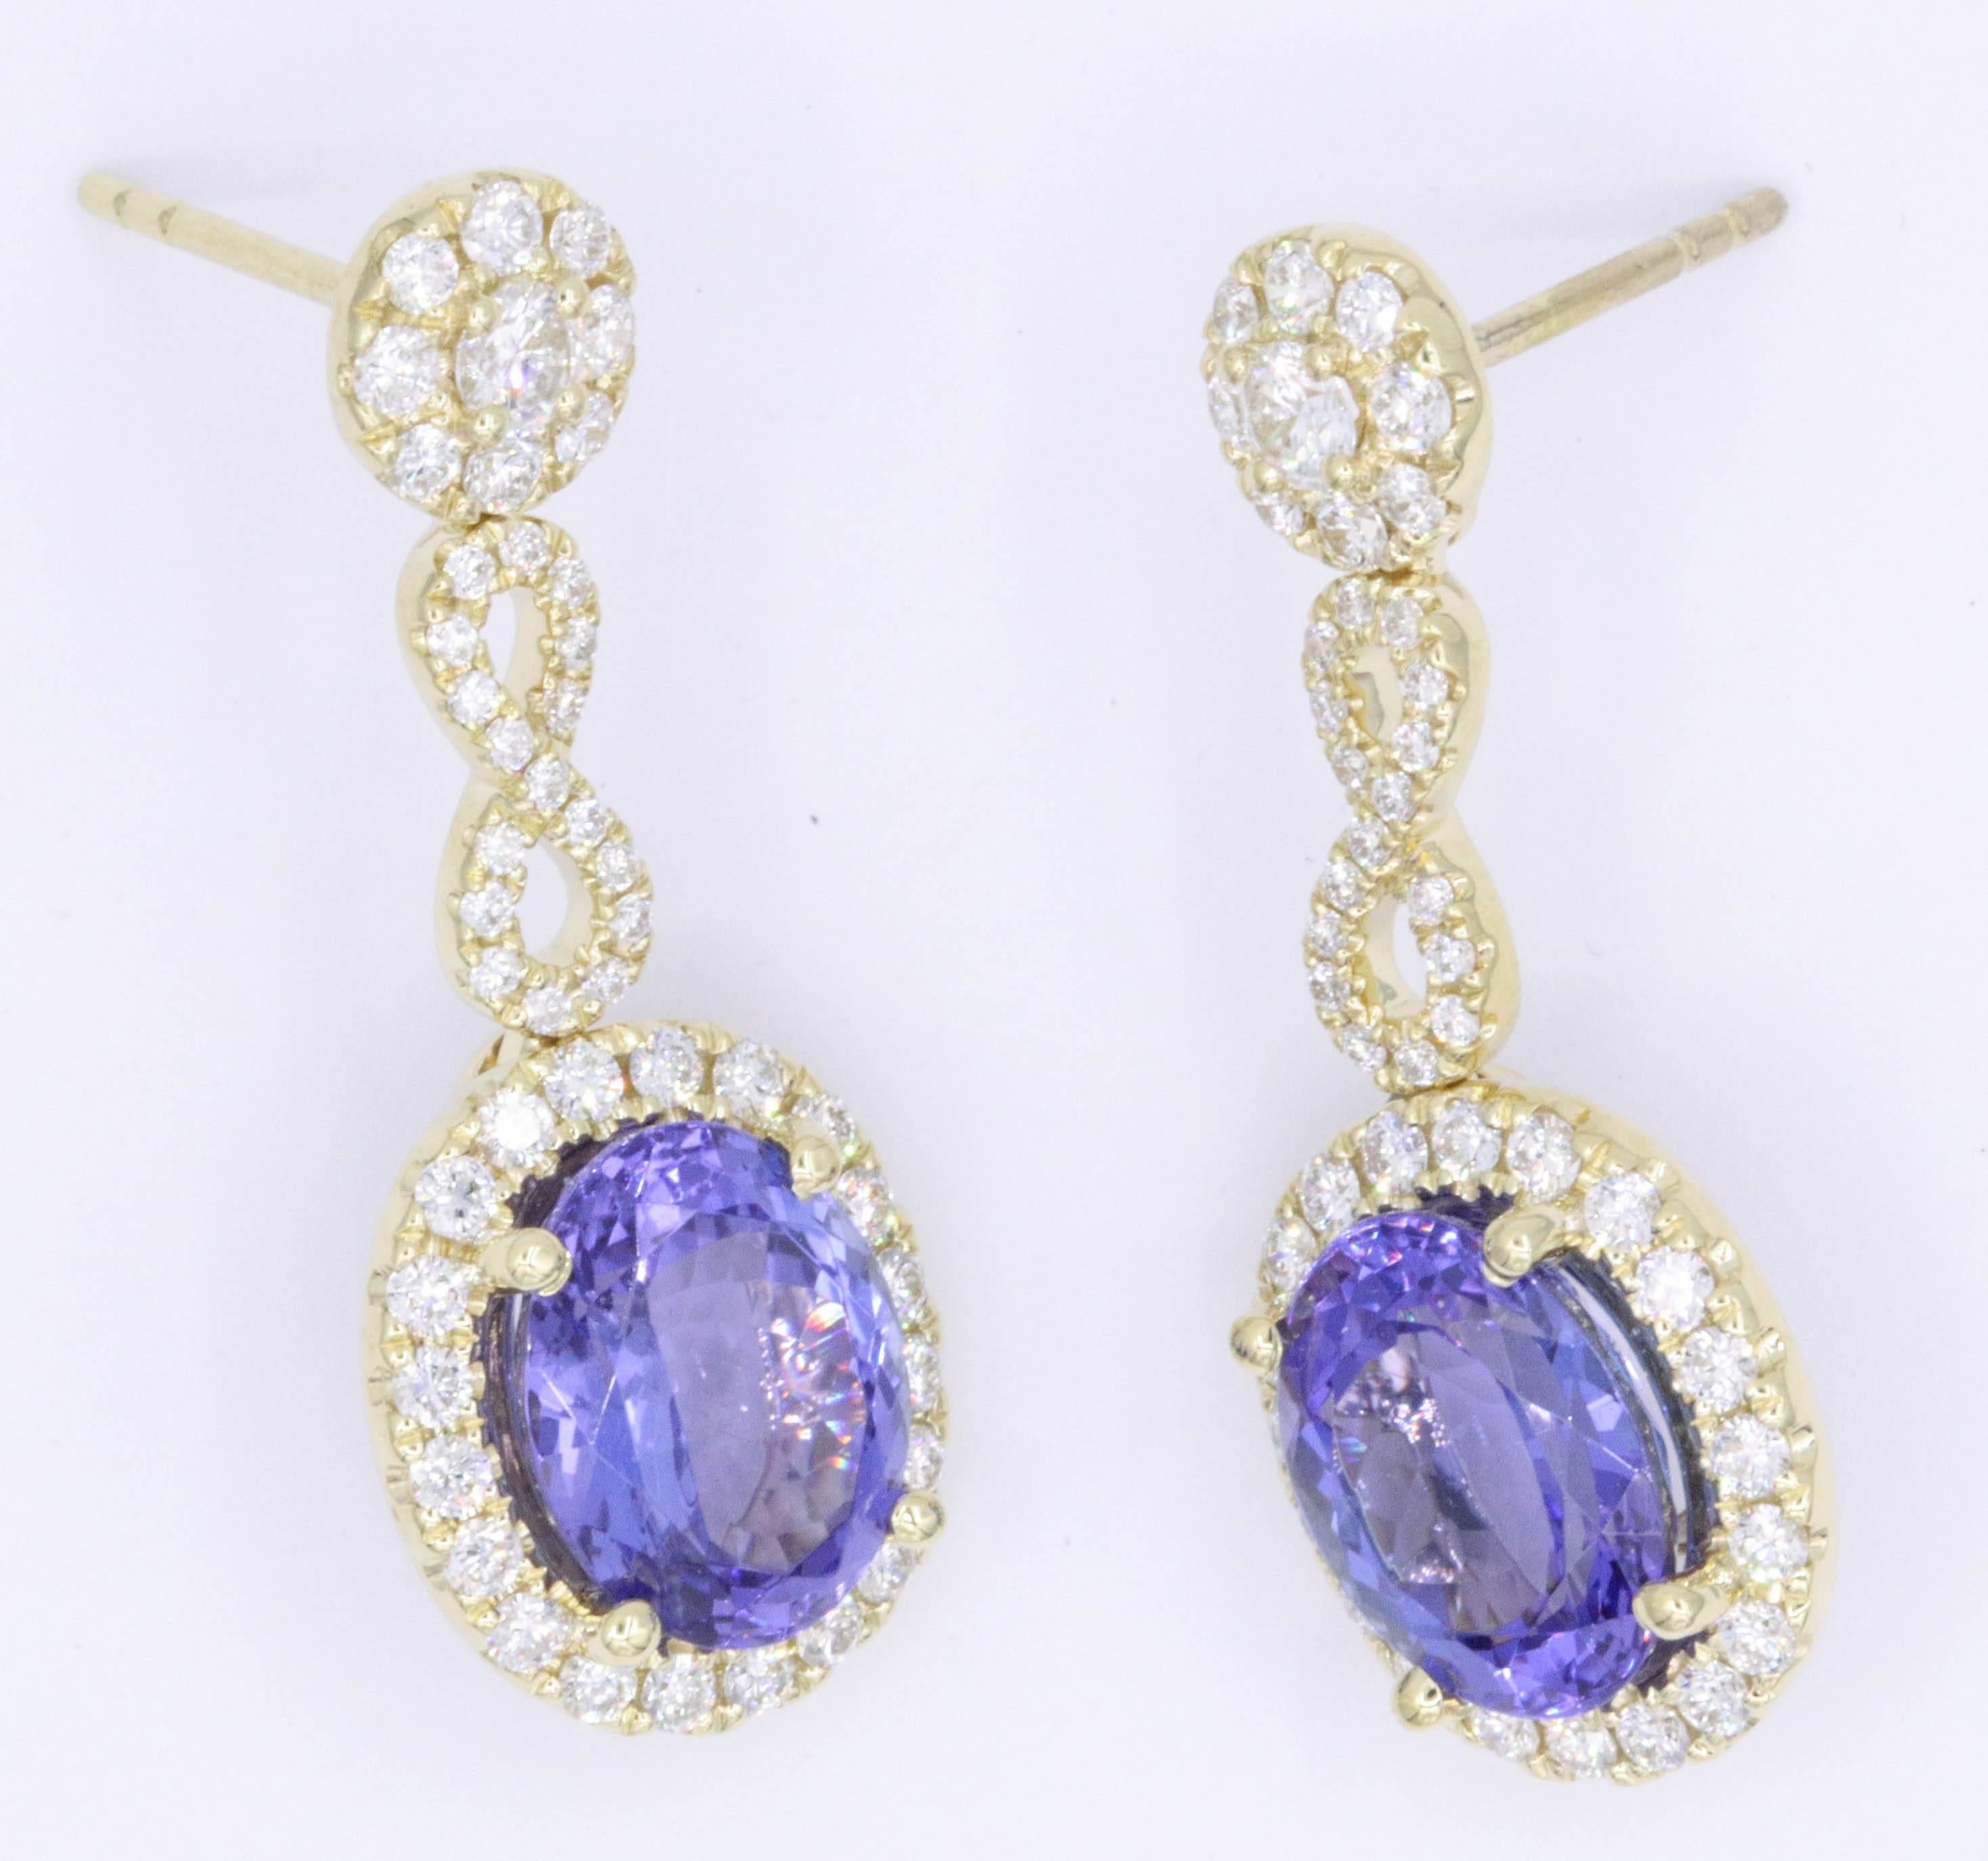 18K Yellow gold earrings featuring two oval shape Tanzanites measuring 7 x 9 mm each and weighing a total weight of 3.30 carats flanked with numerous weighing 1.13 carats. Color G-H Clarity SI
Earrings 1